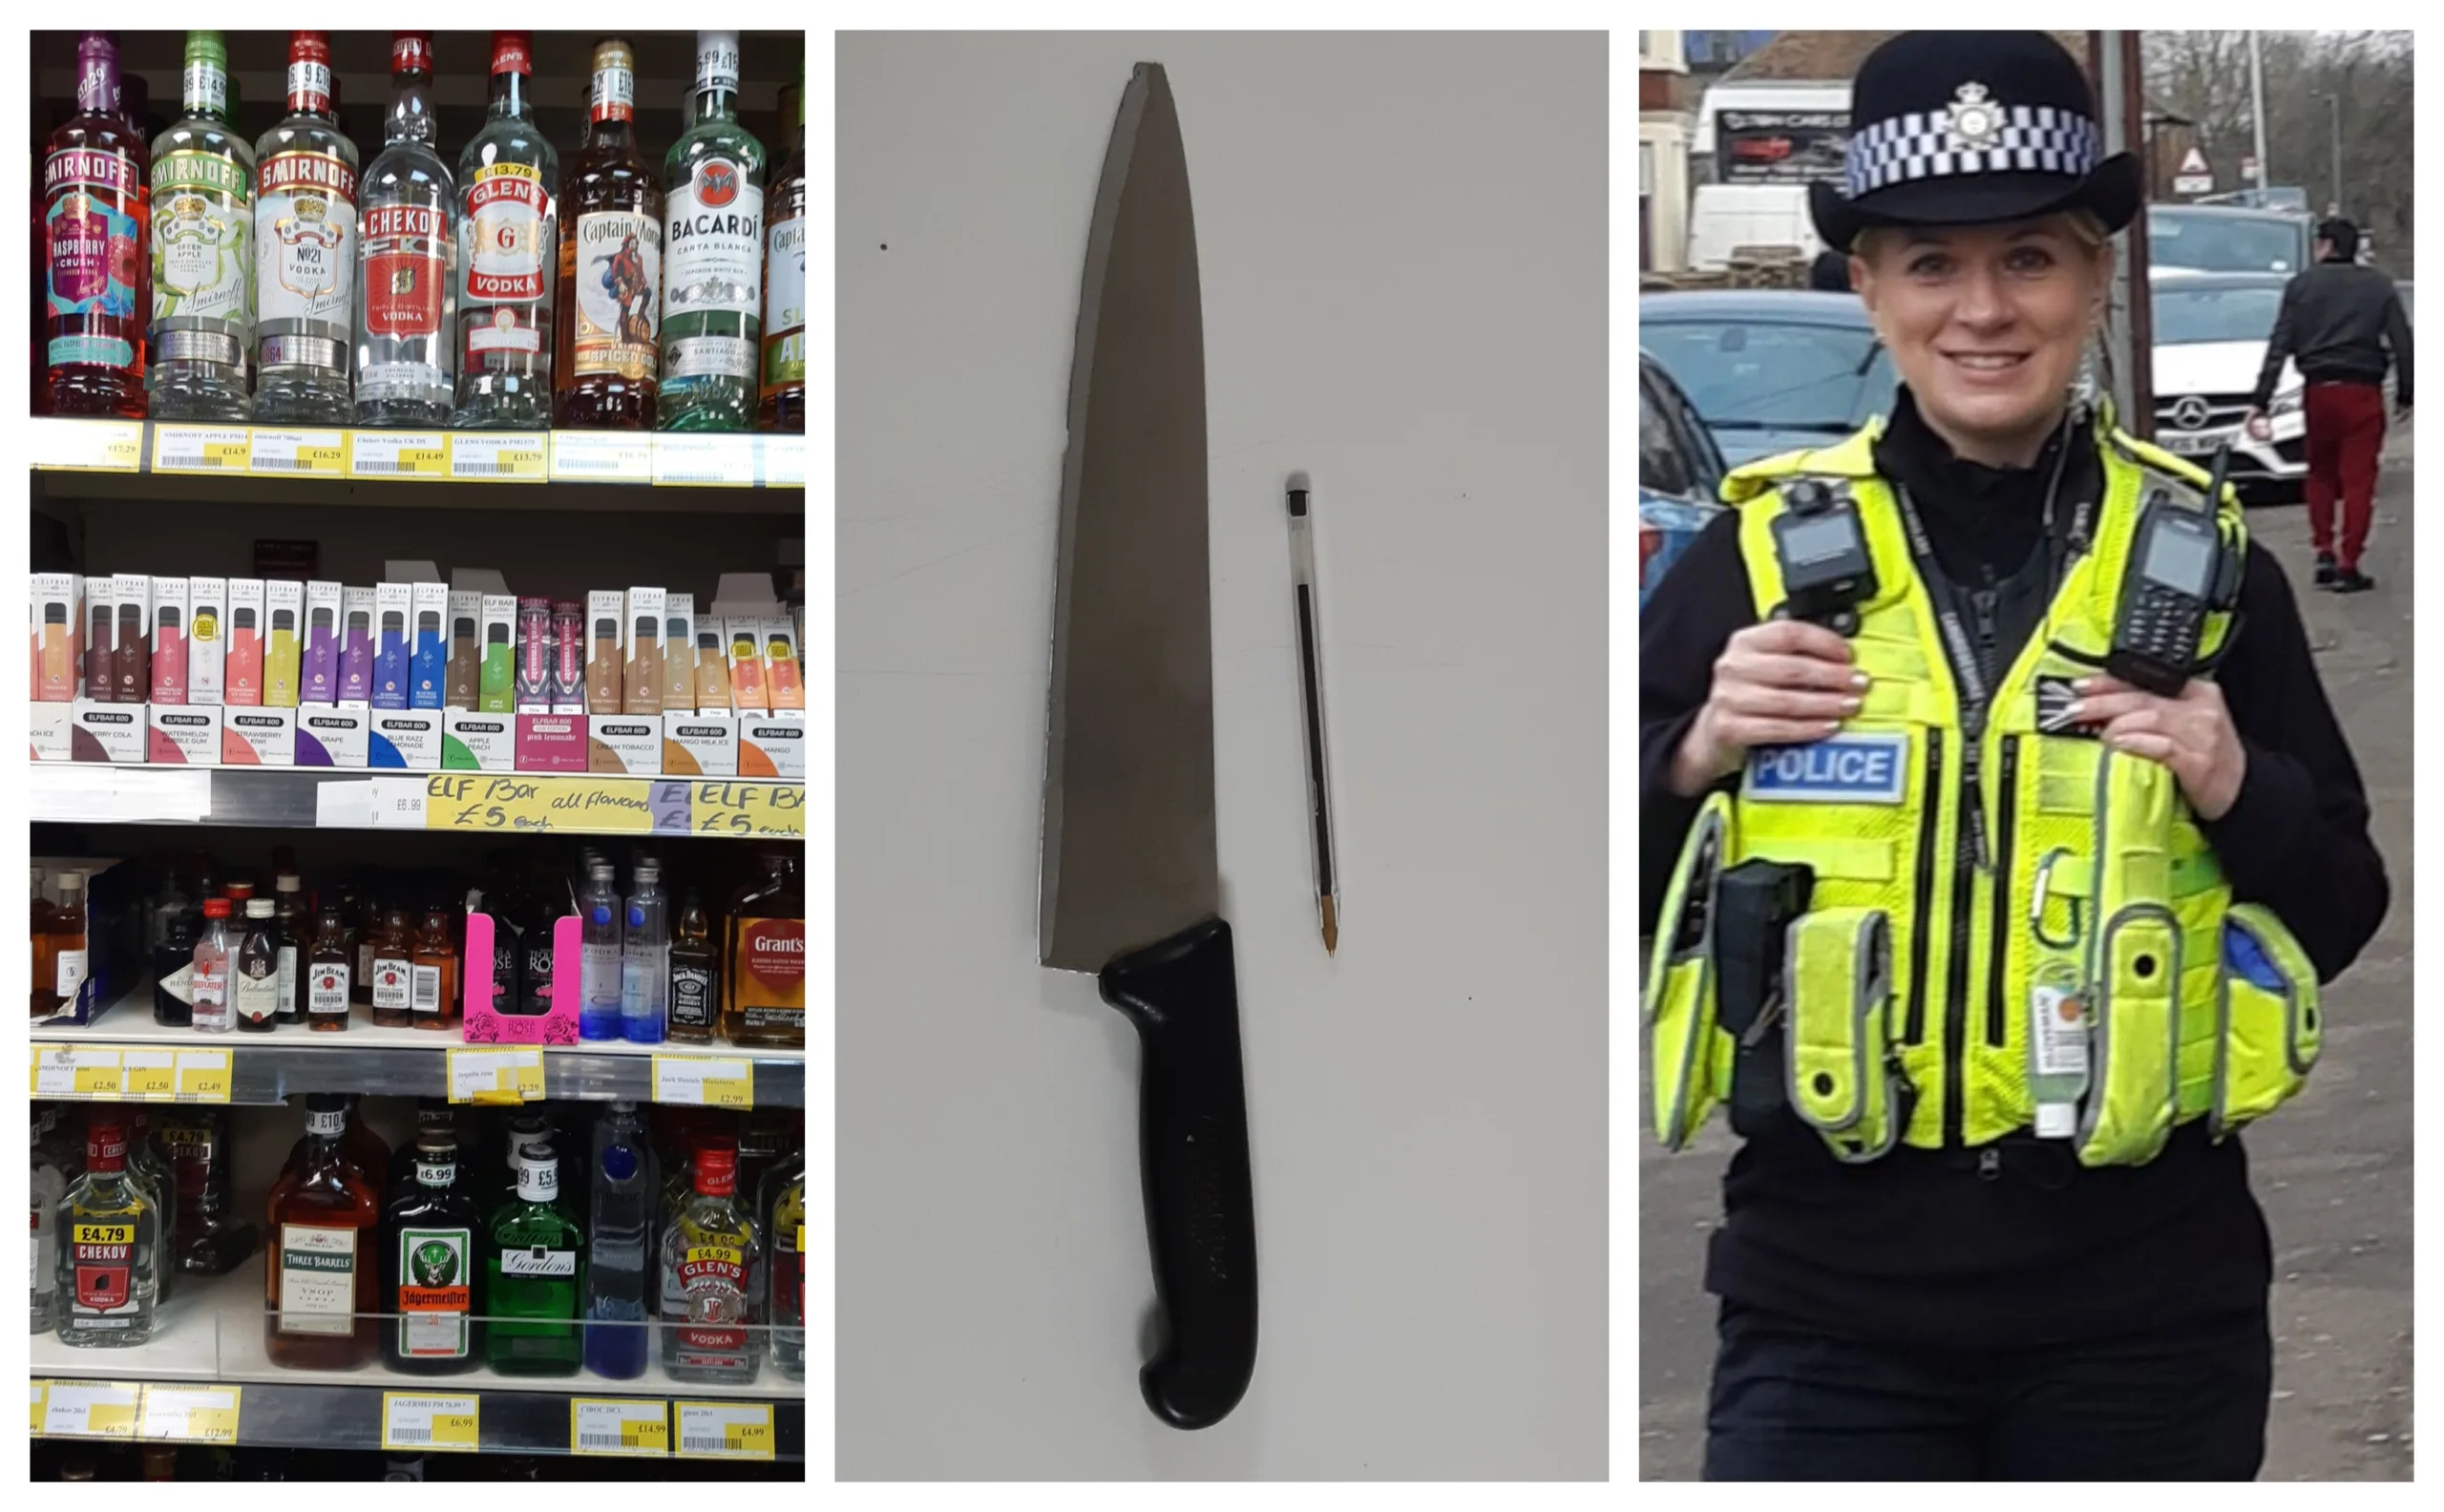 Photos from Peterborough police of their spot checks on off licences and shops in Woodston and Fletton. They took away a knife found next to a till in one of the shops.